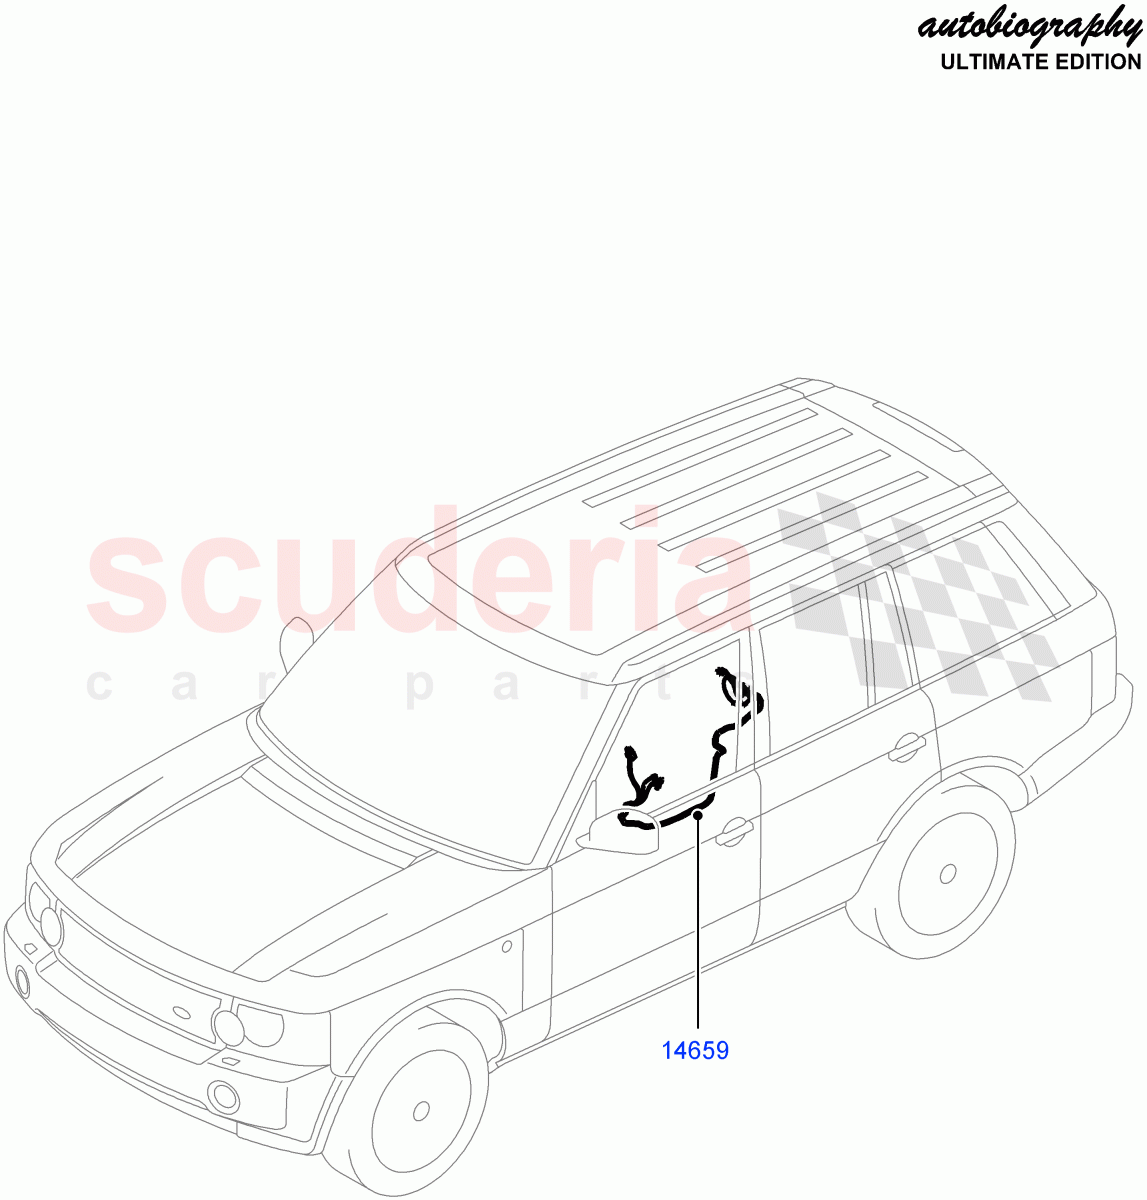 Wiring - Seats(Autobiography Ultimate Edition)((V)FROMBA344356) of Land Rover Land Rover Range Rover (2010-2012) [4.4 DOHC Diesel V8 DITC]